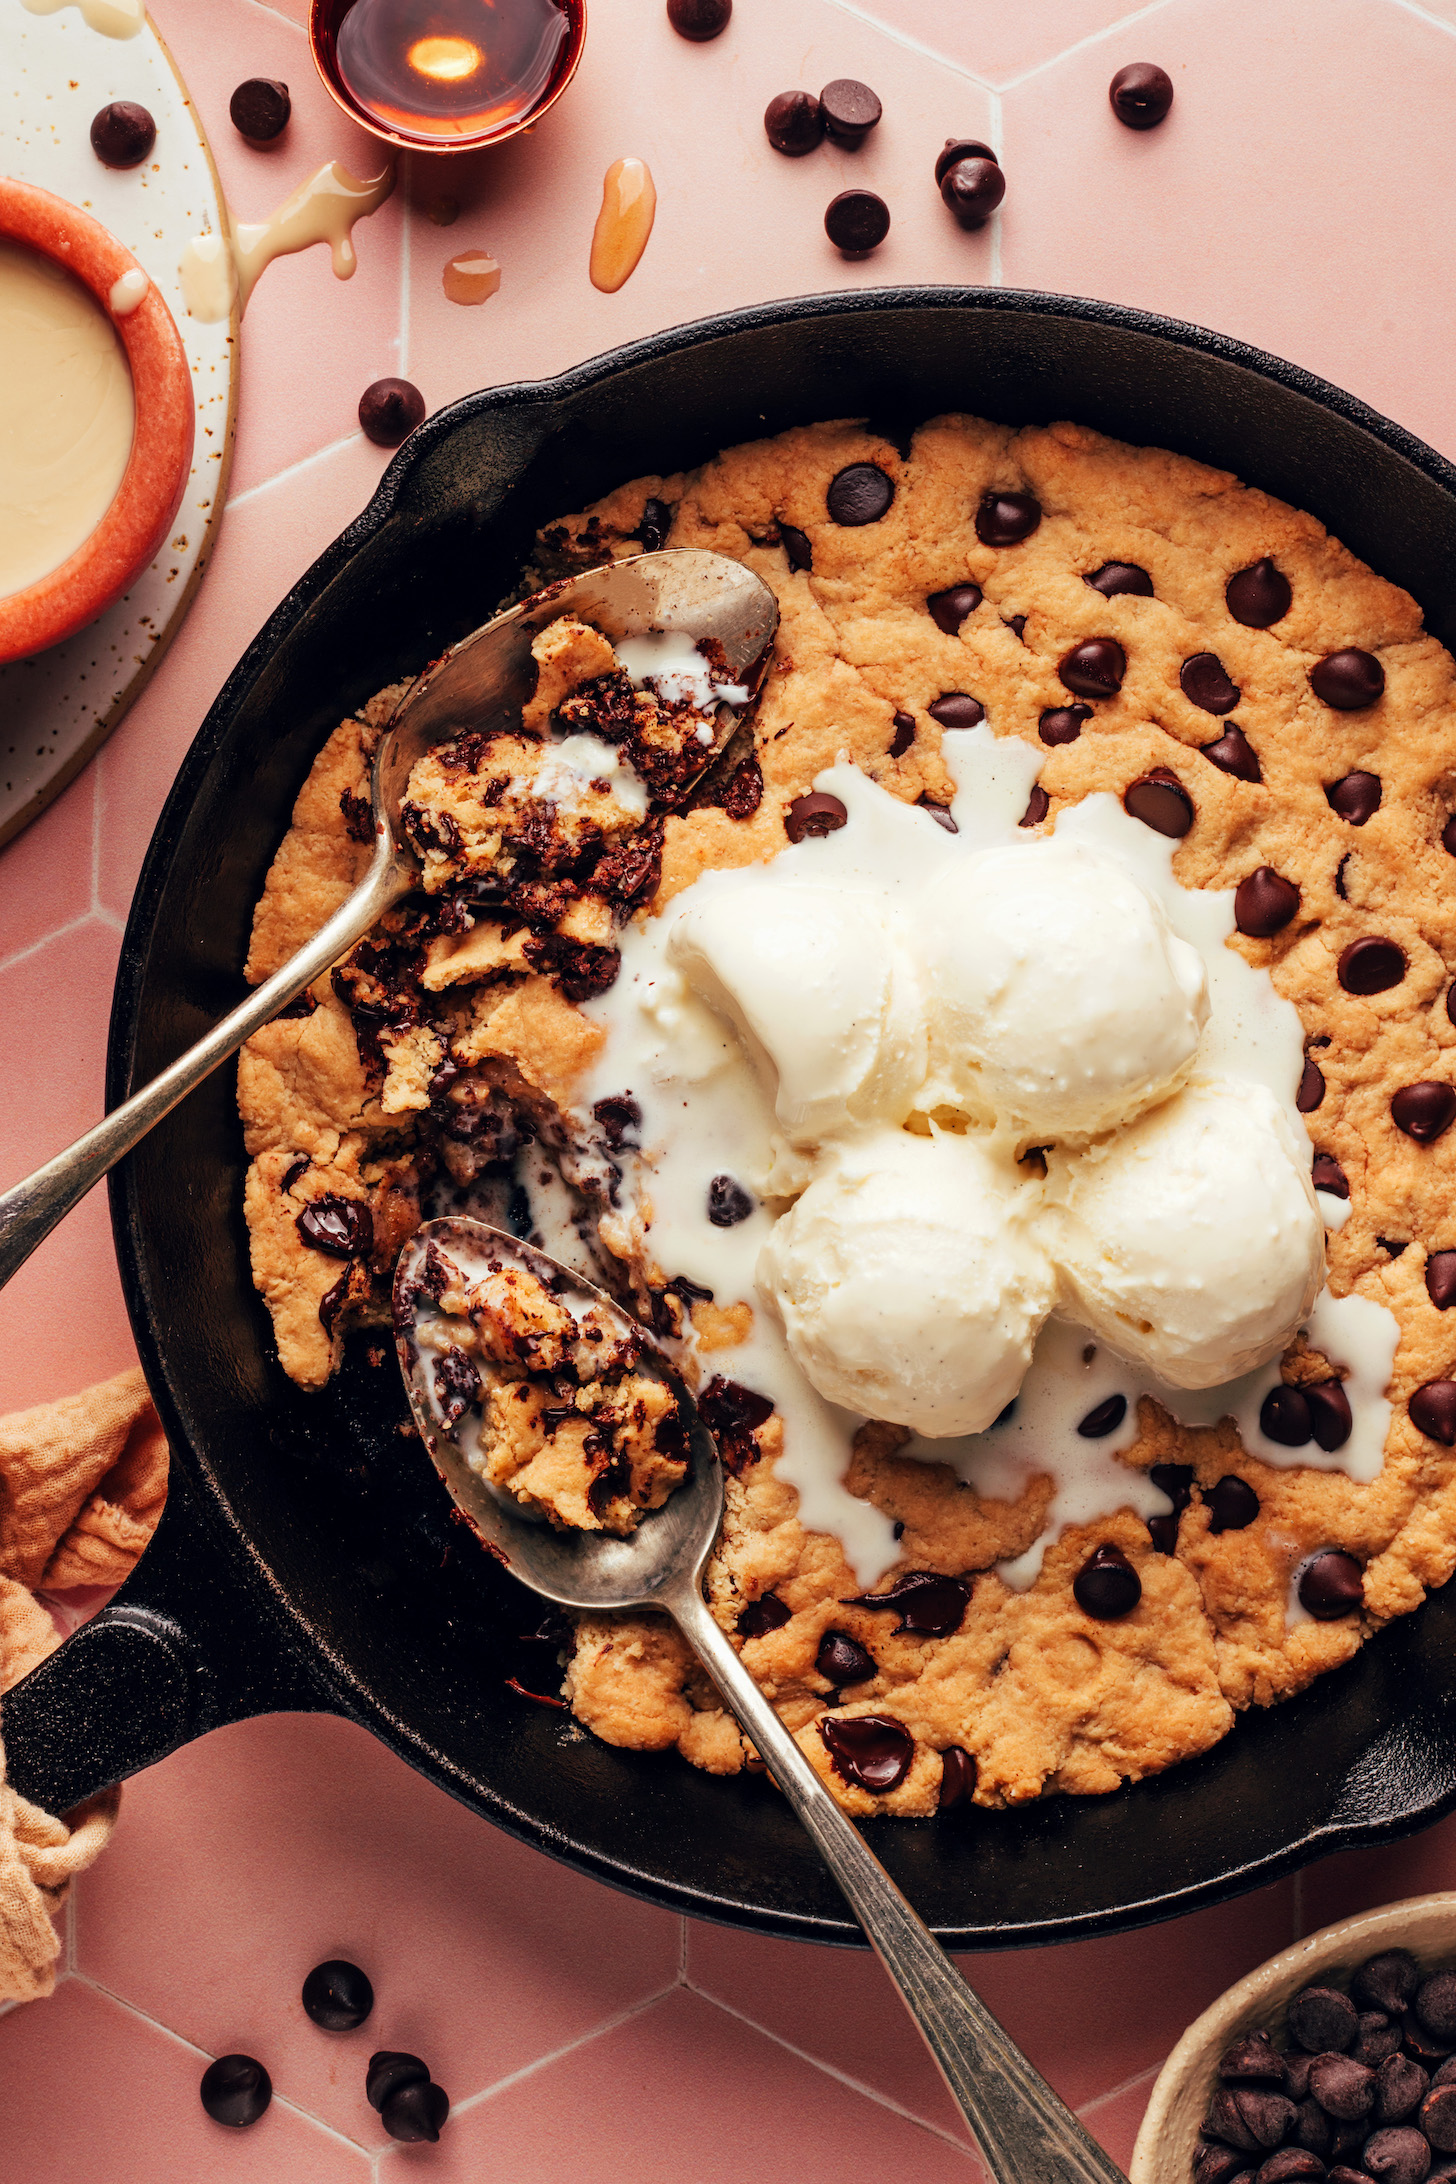 Scoops of vanilla ice cream melting on top of a chocolate chip skillet cookie